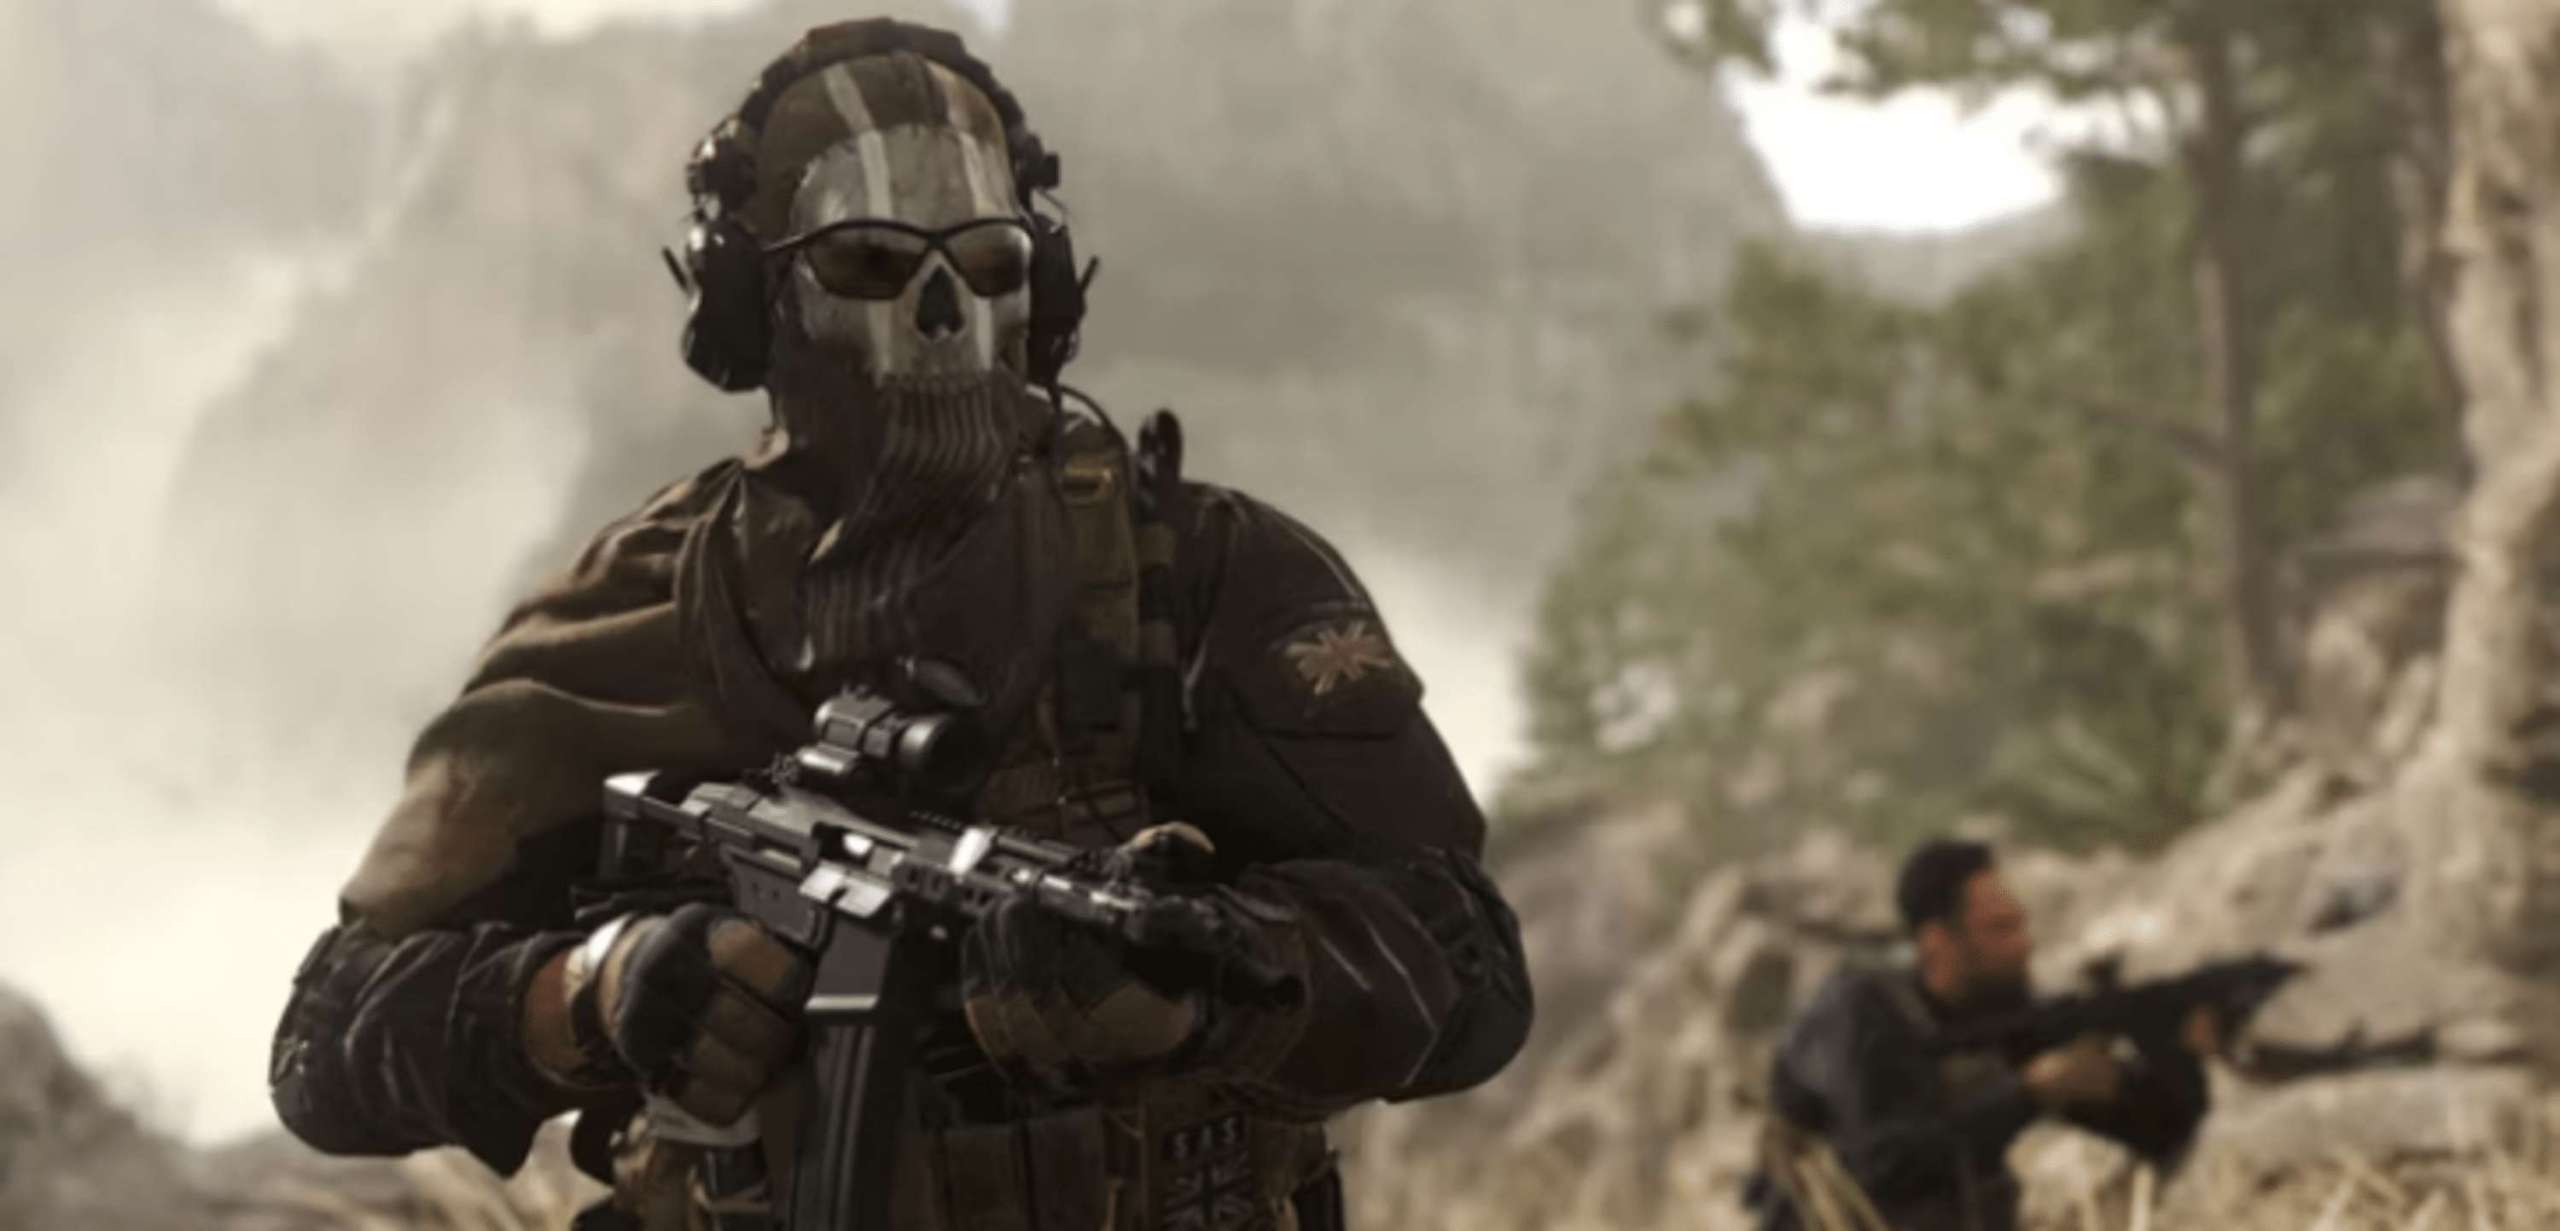 A Call Of Duty: Modern Warfare 2 Player Who Was Banned Goes To Activision’s Headquarters To Lodge An Appeal